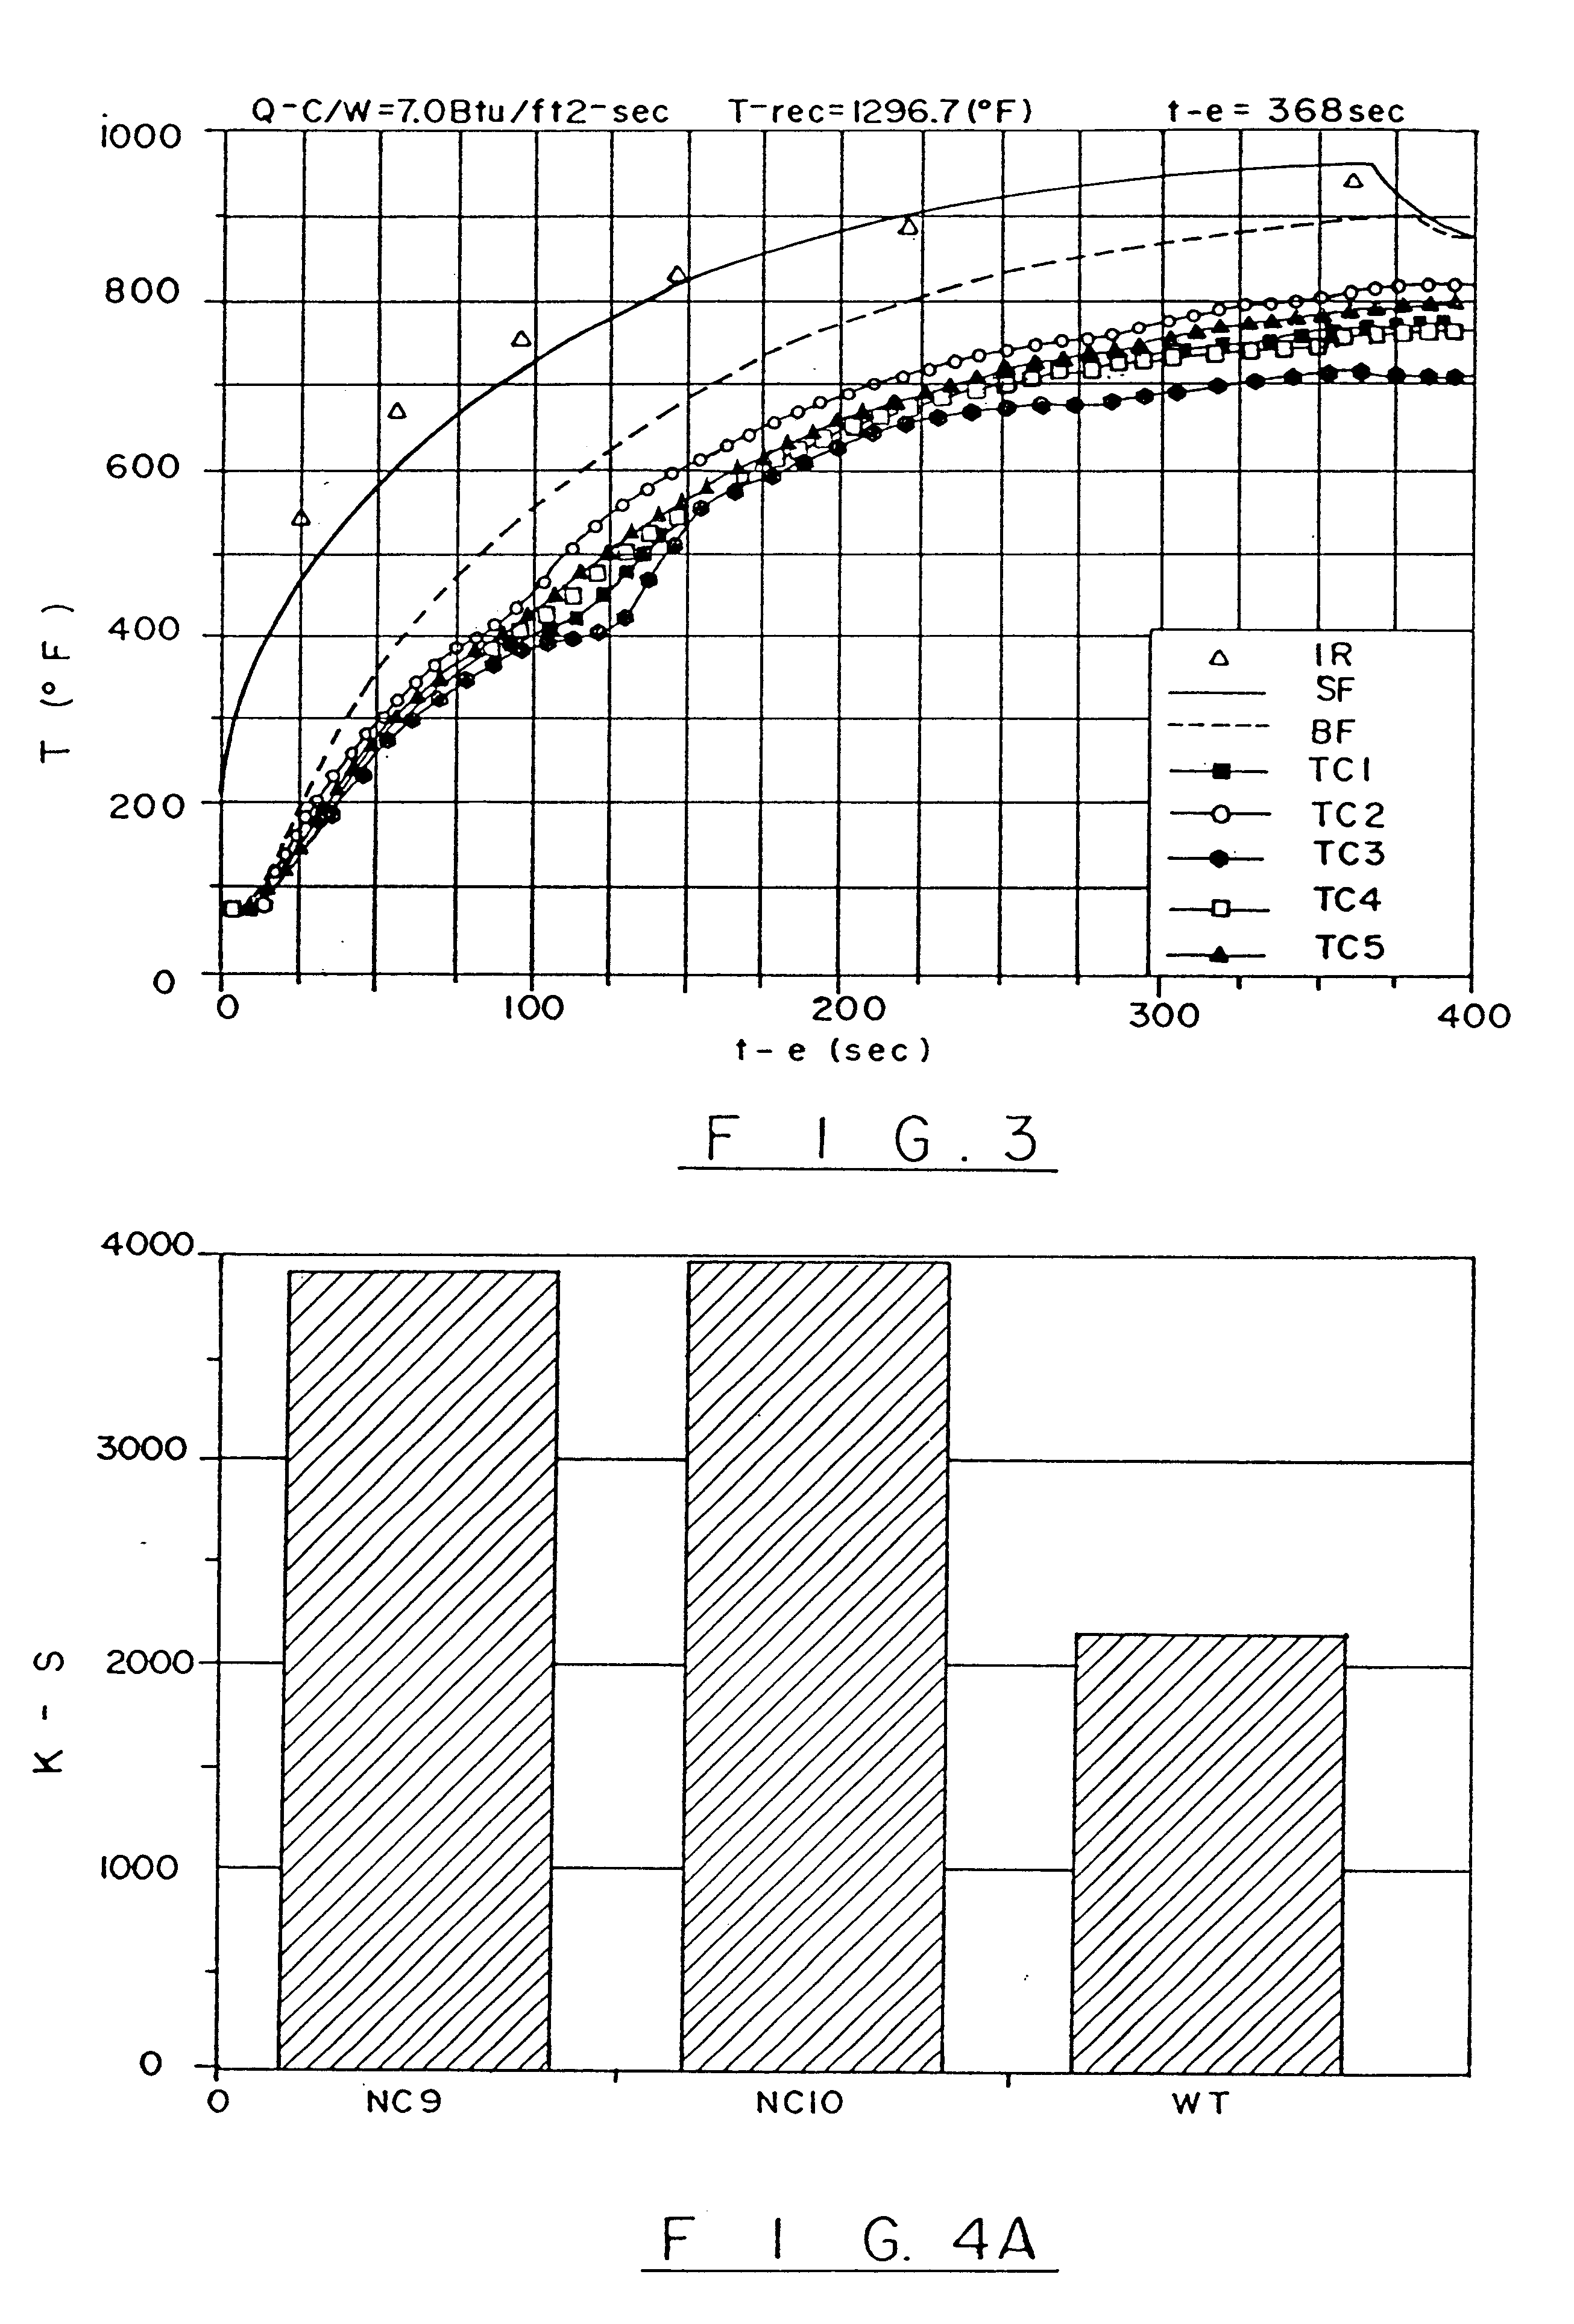 High performance structural laminate composite material for use to 1000° F. and above, apparatus for and method of manufacturing same, and articles made with same